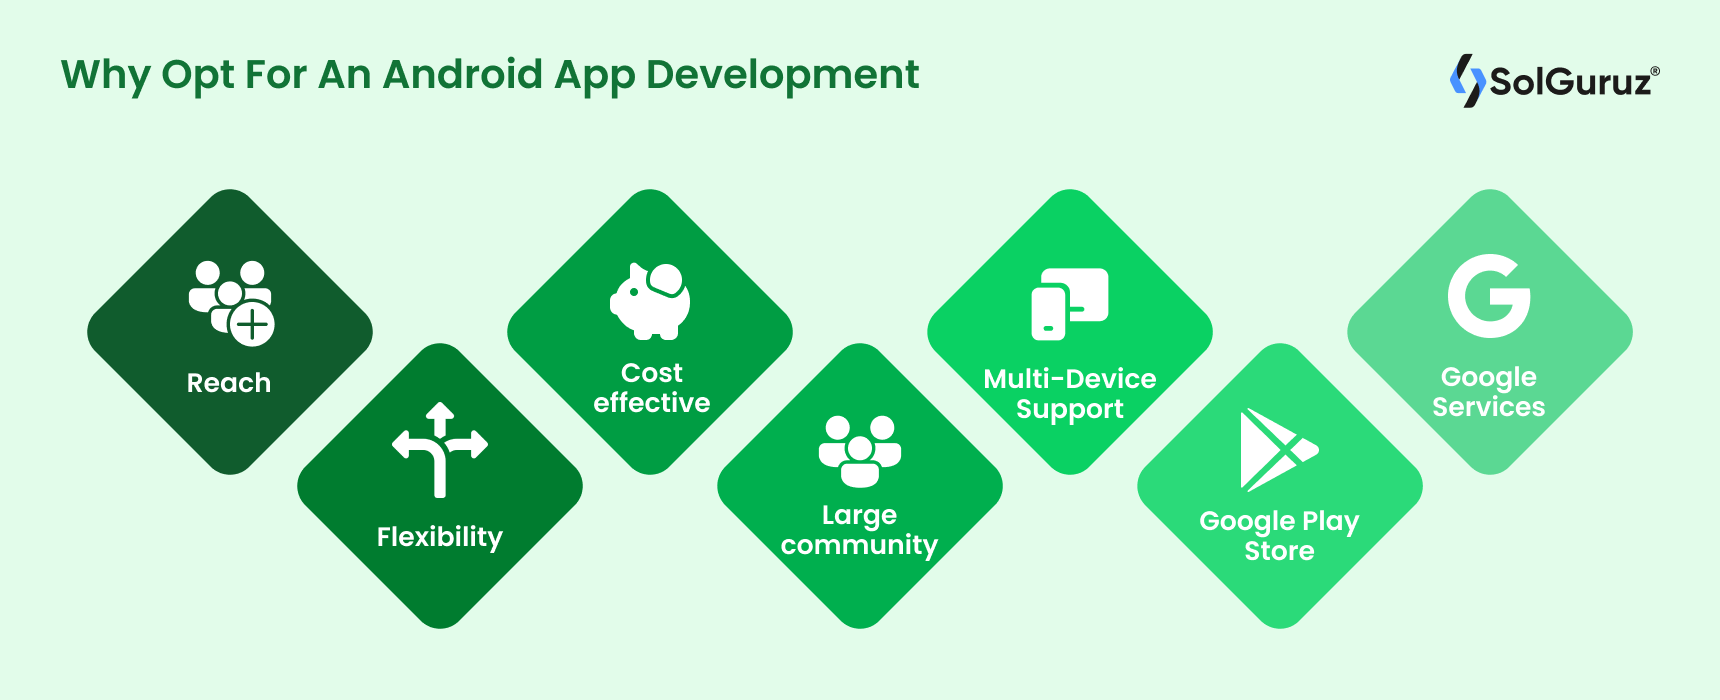 Why Opt For An Android App Development